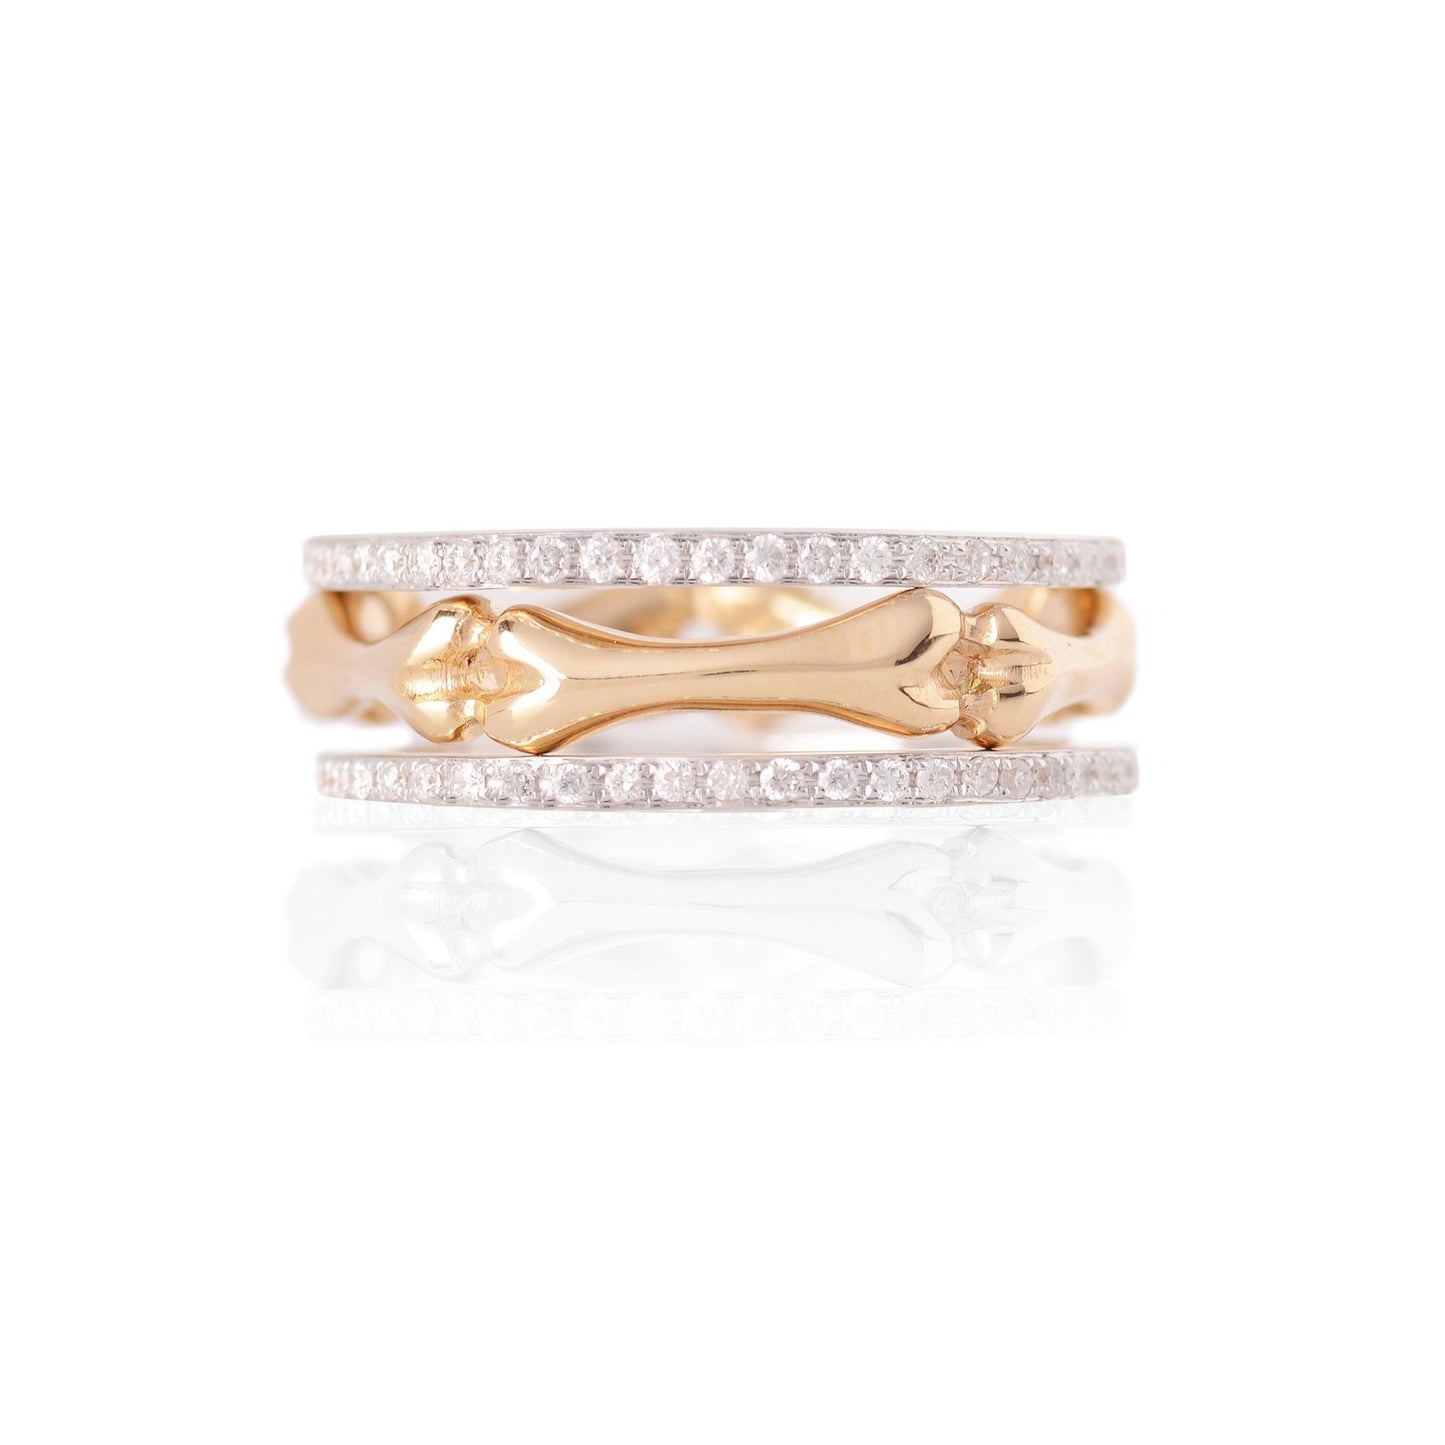 White Gold, Diamond and Gold Little Phalanx Stack by McFarlane Fine Jewellery